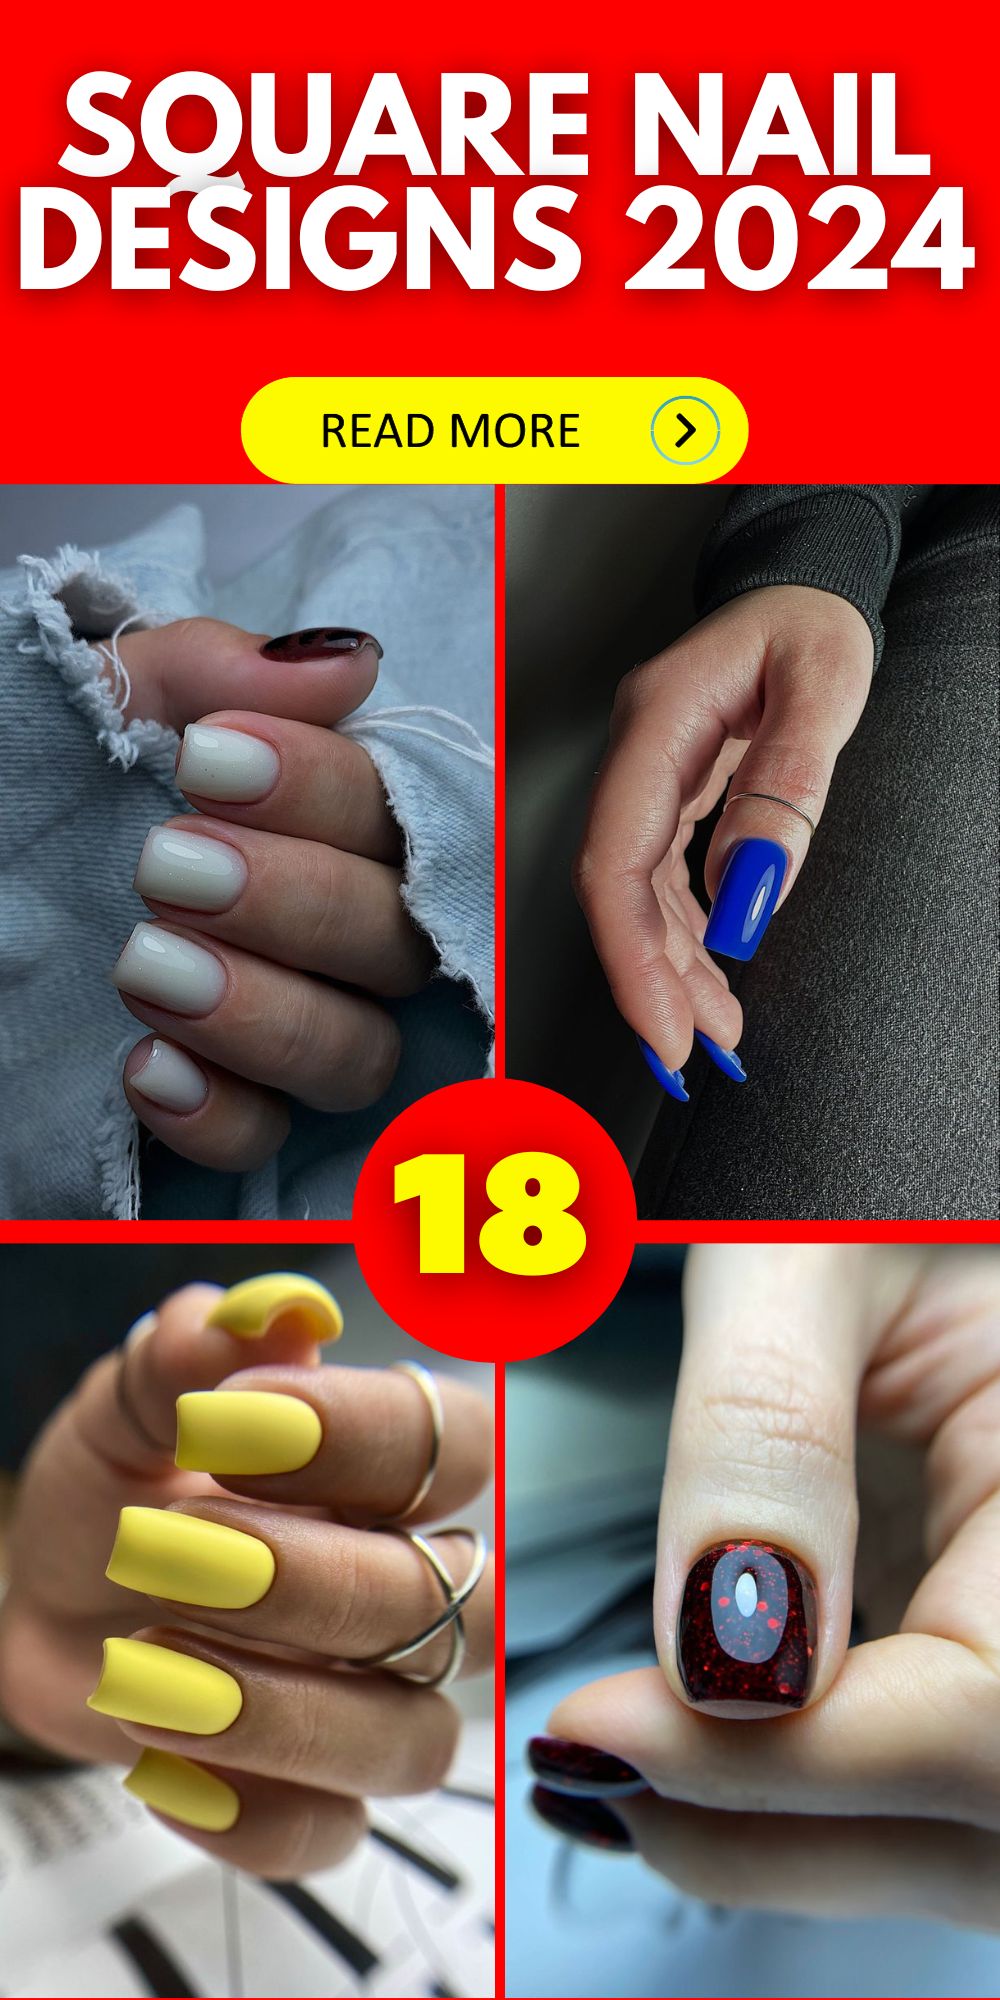 Explore Top Square Nail Designs 2024: Chic Styles & Bold Colors